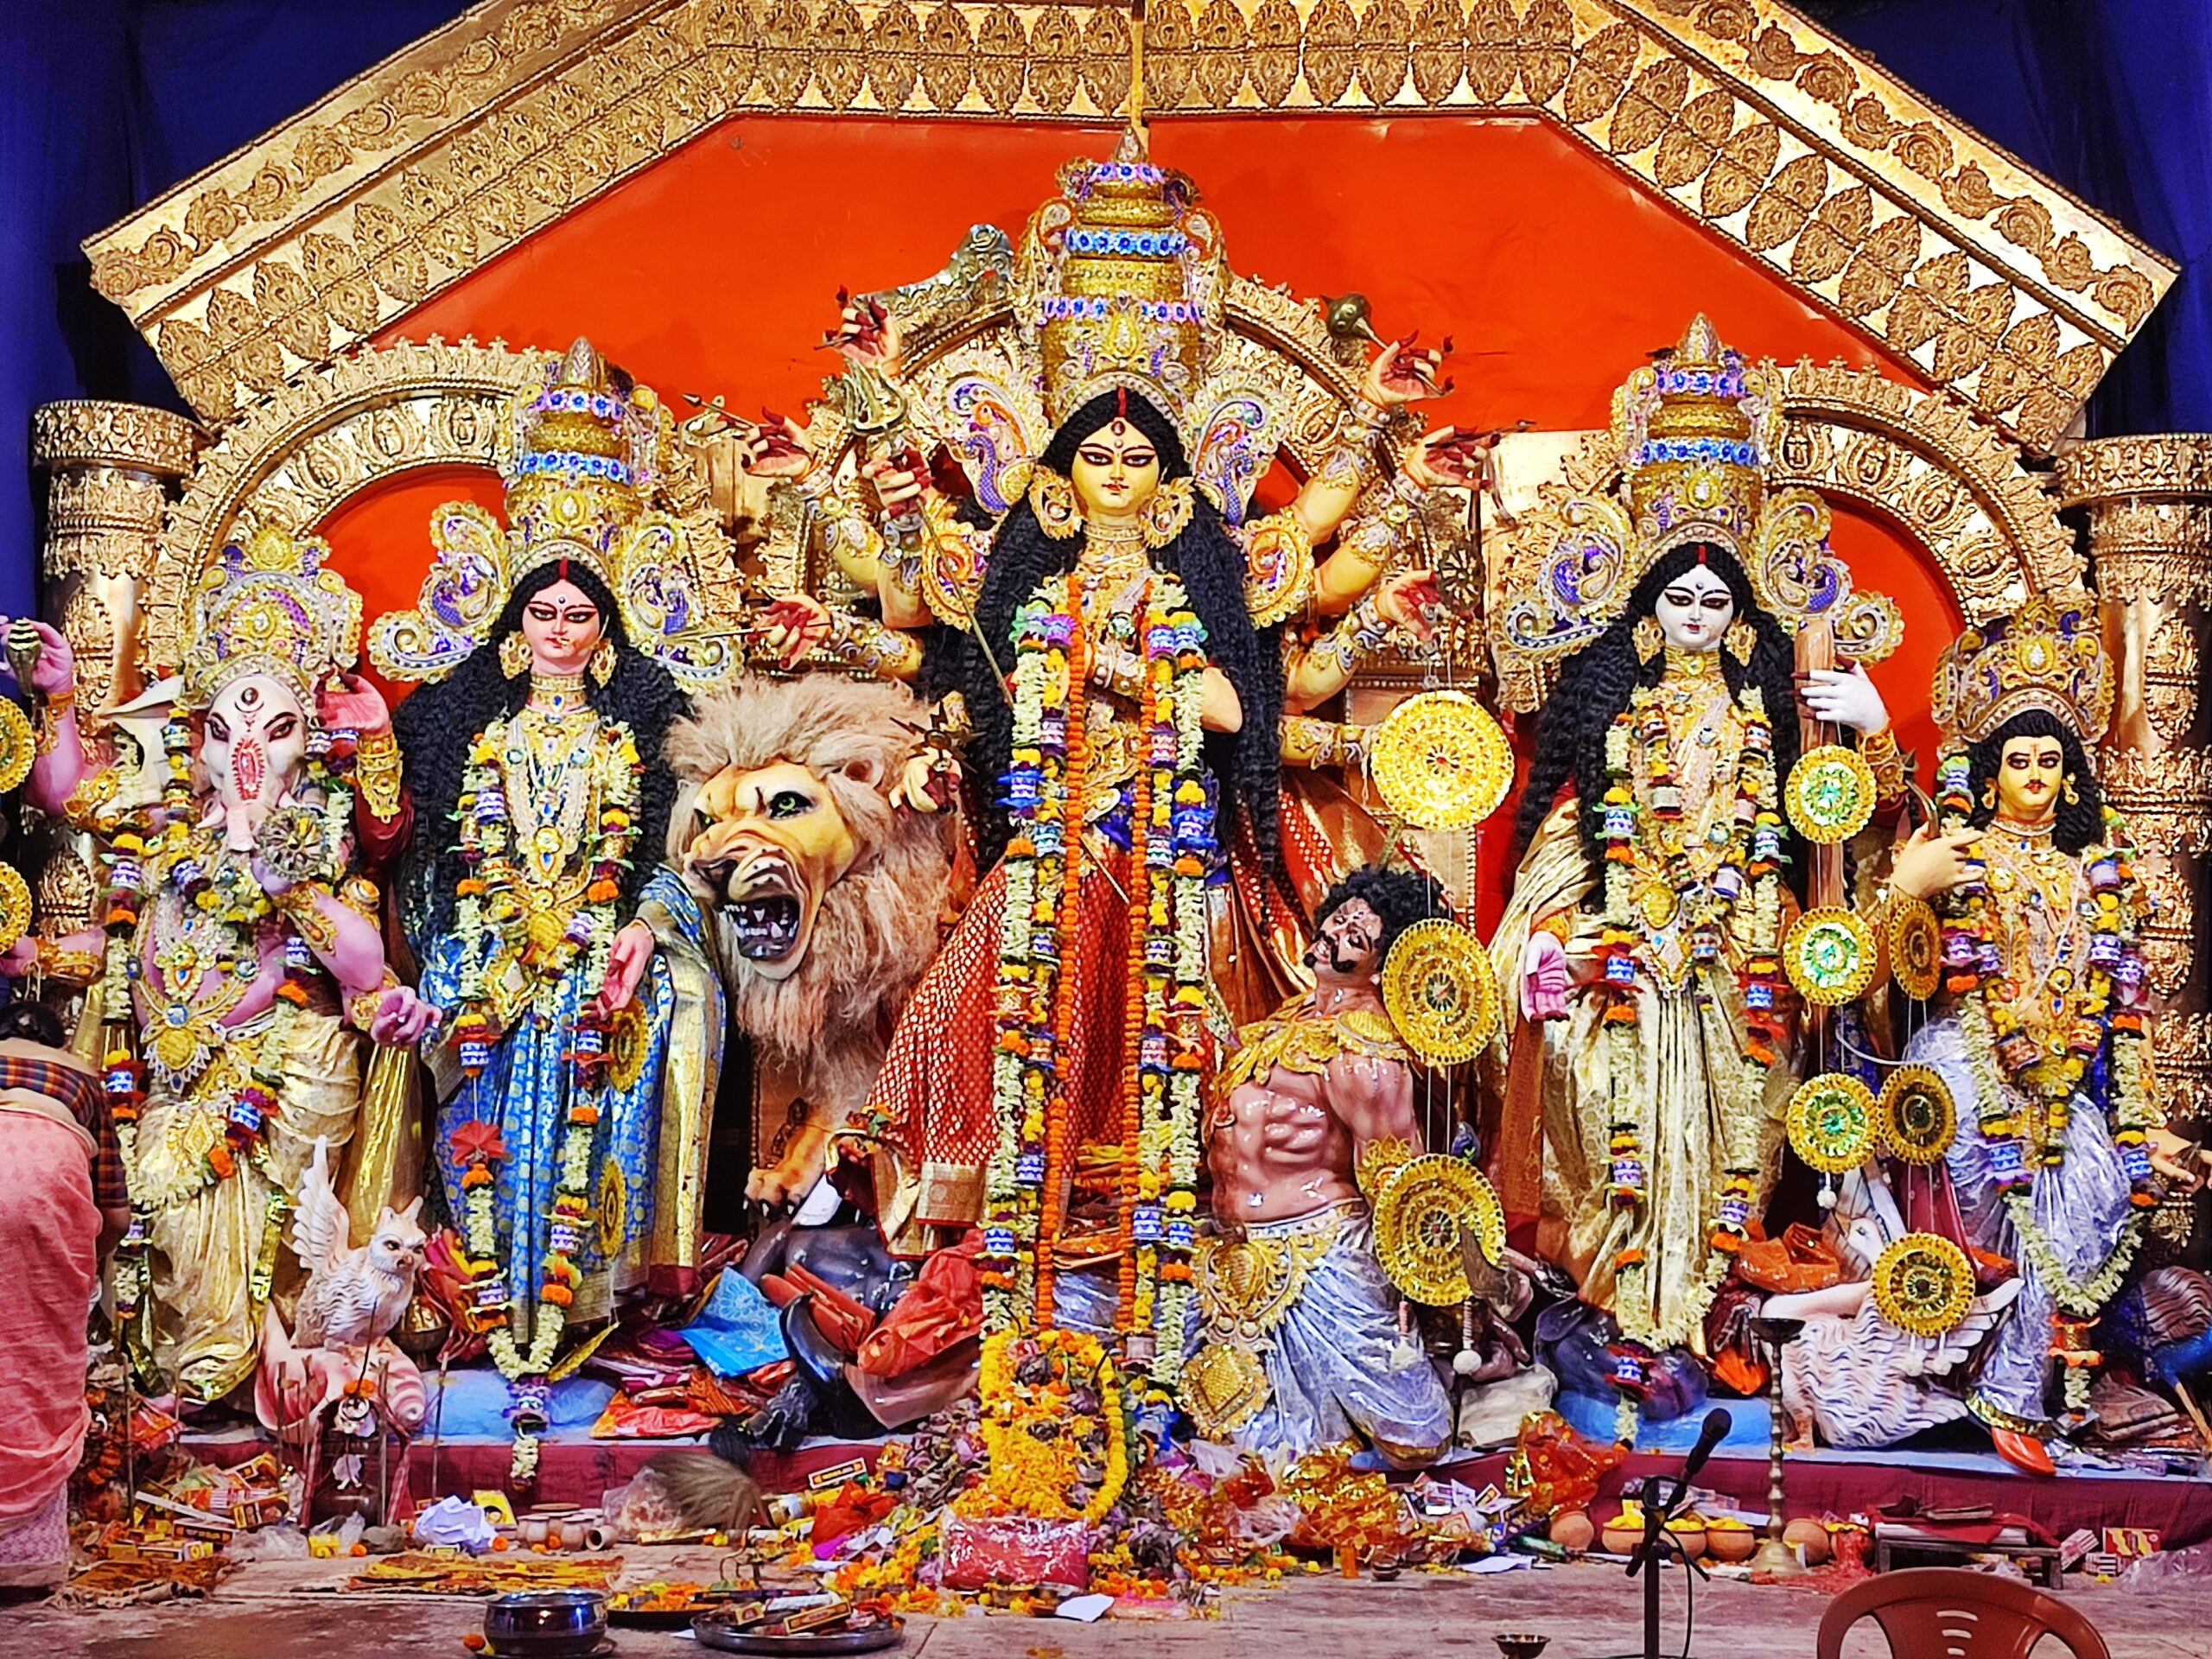 when-is-durga-puja-cheap-offer-save-63-jlcatj-gob-mx